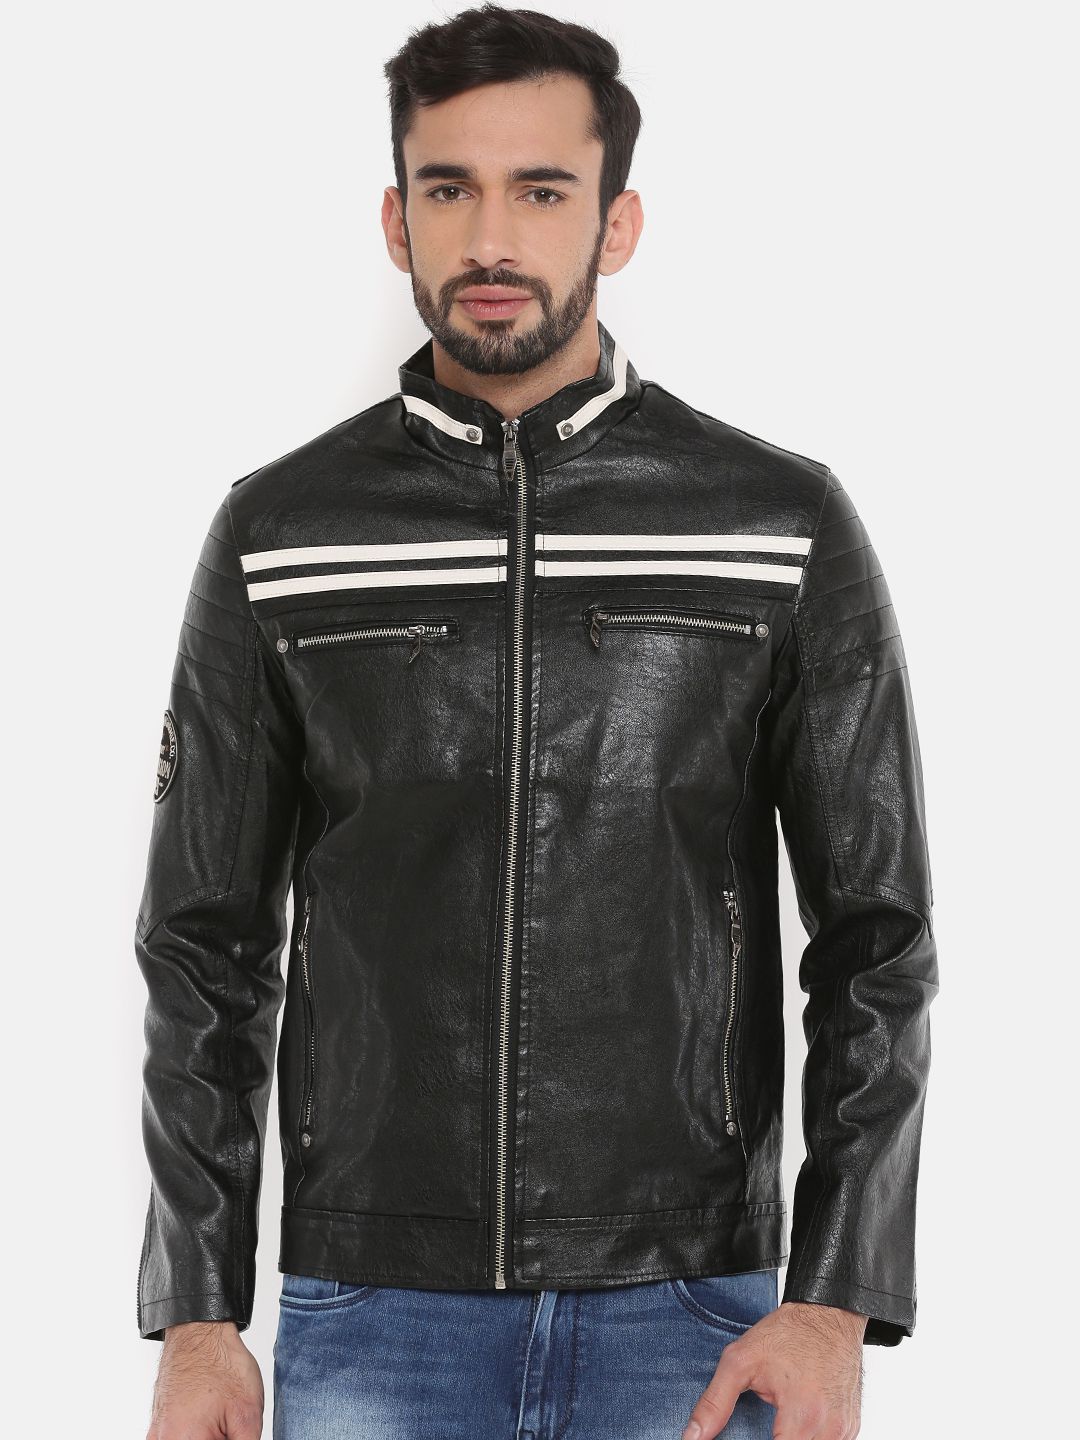 The Indian Garage Co. Black Leather Jacket - Buy The Indian Garage Co ...